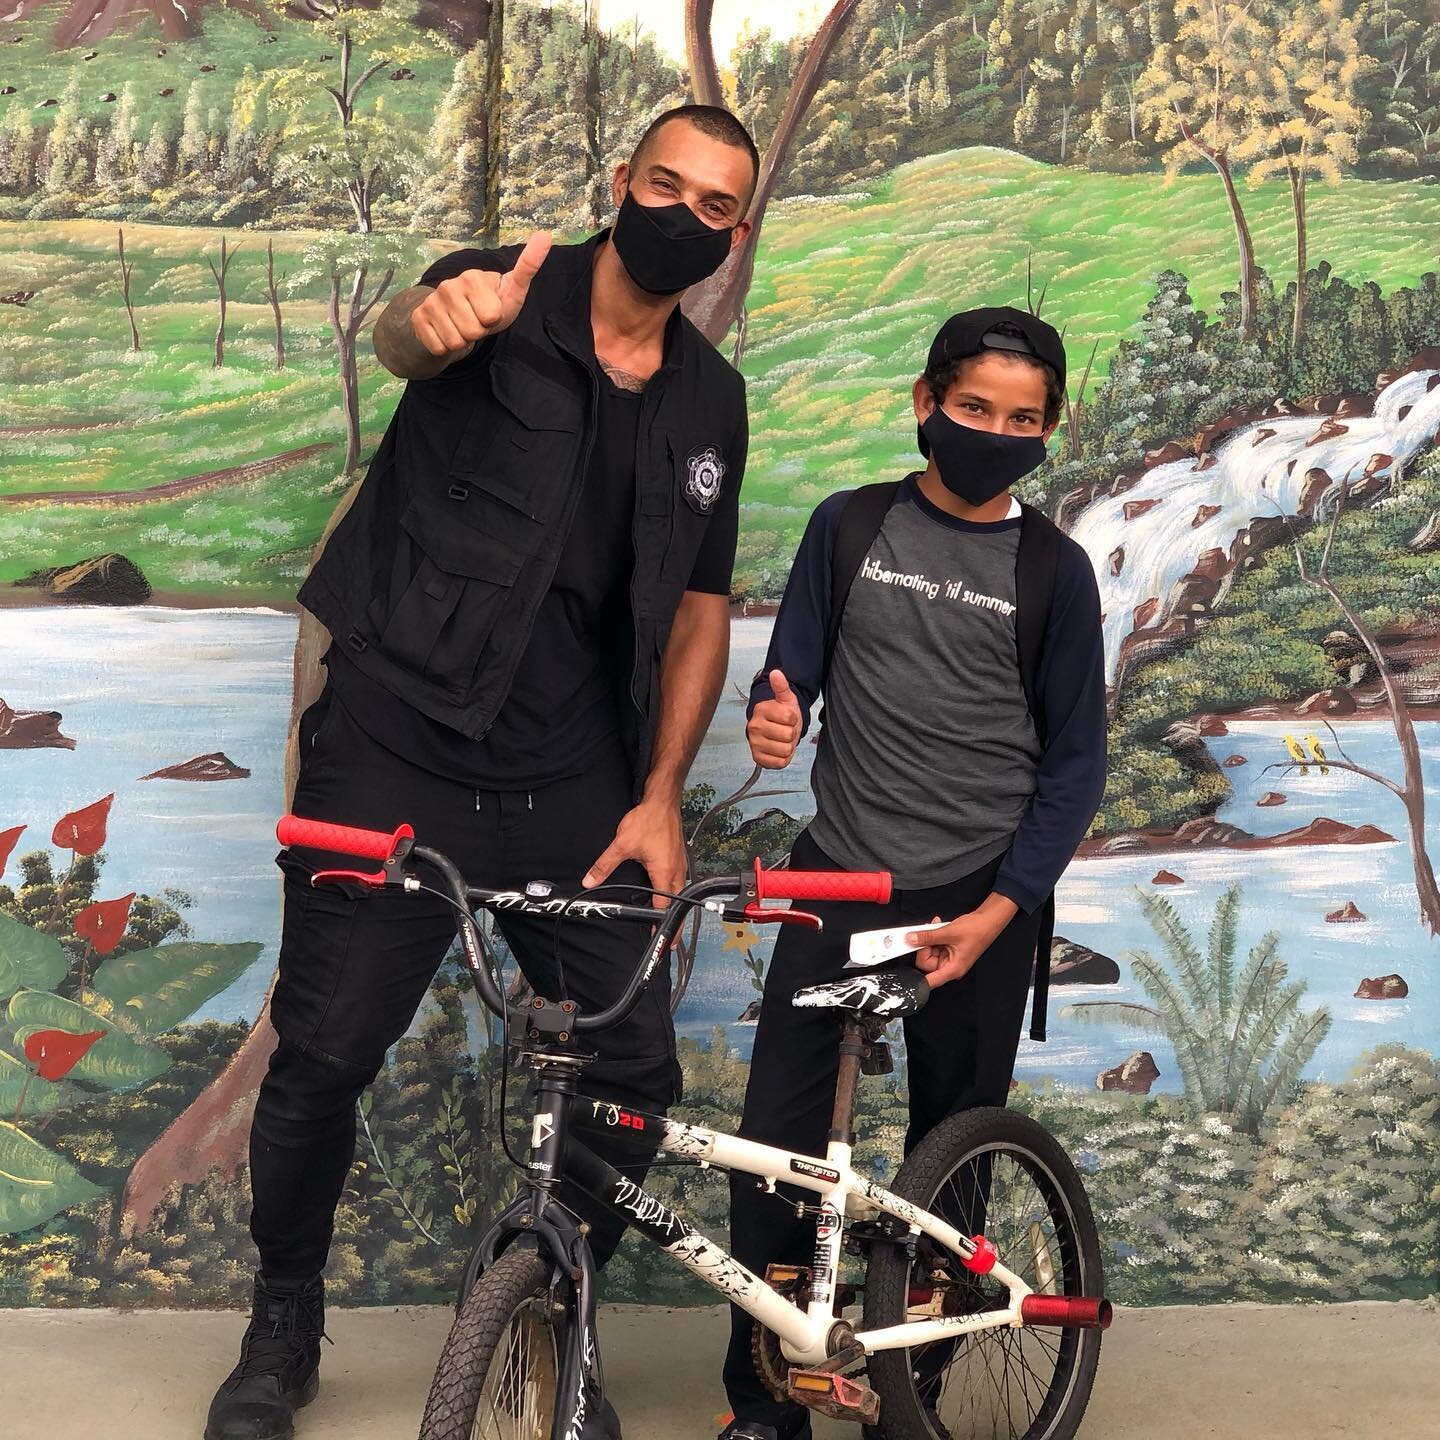 During a recent service project at a local home we found a bicycle in a pile of old metal scraps. We learned that the bicycle belongs to the son of the family who used it to transport himself to school. The bike had broken and because of the family&r